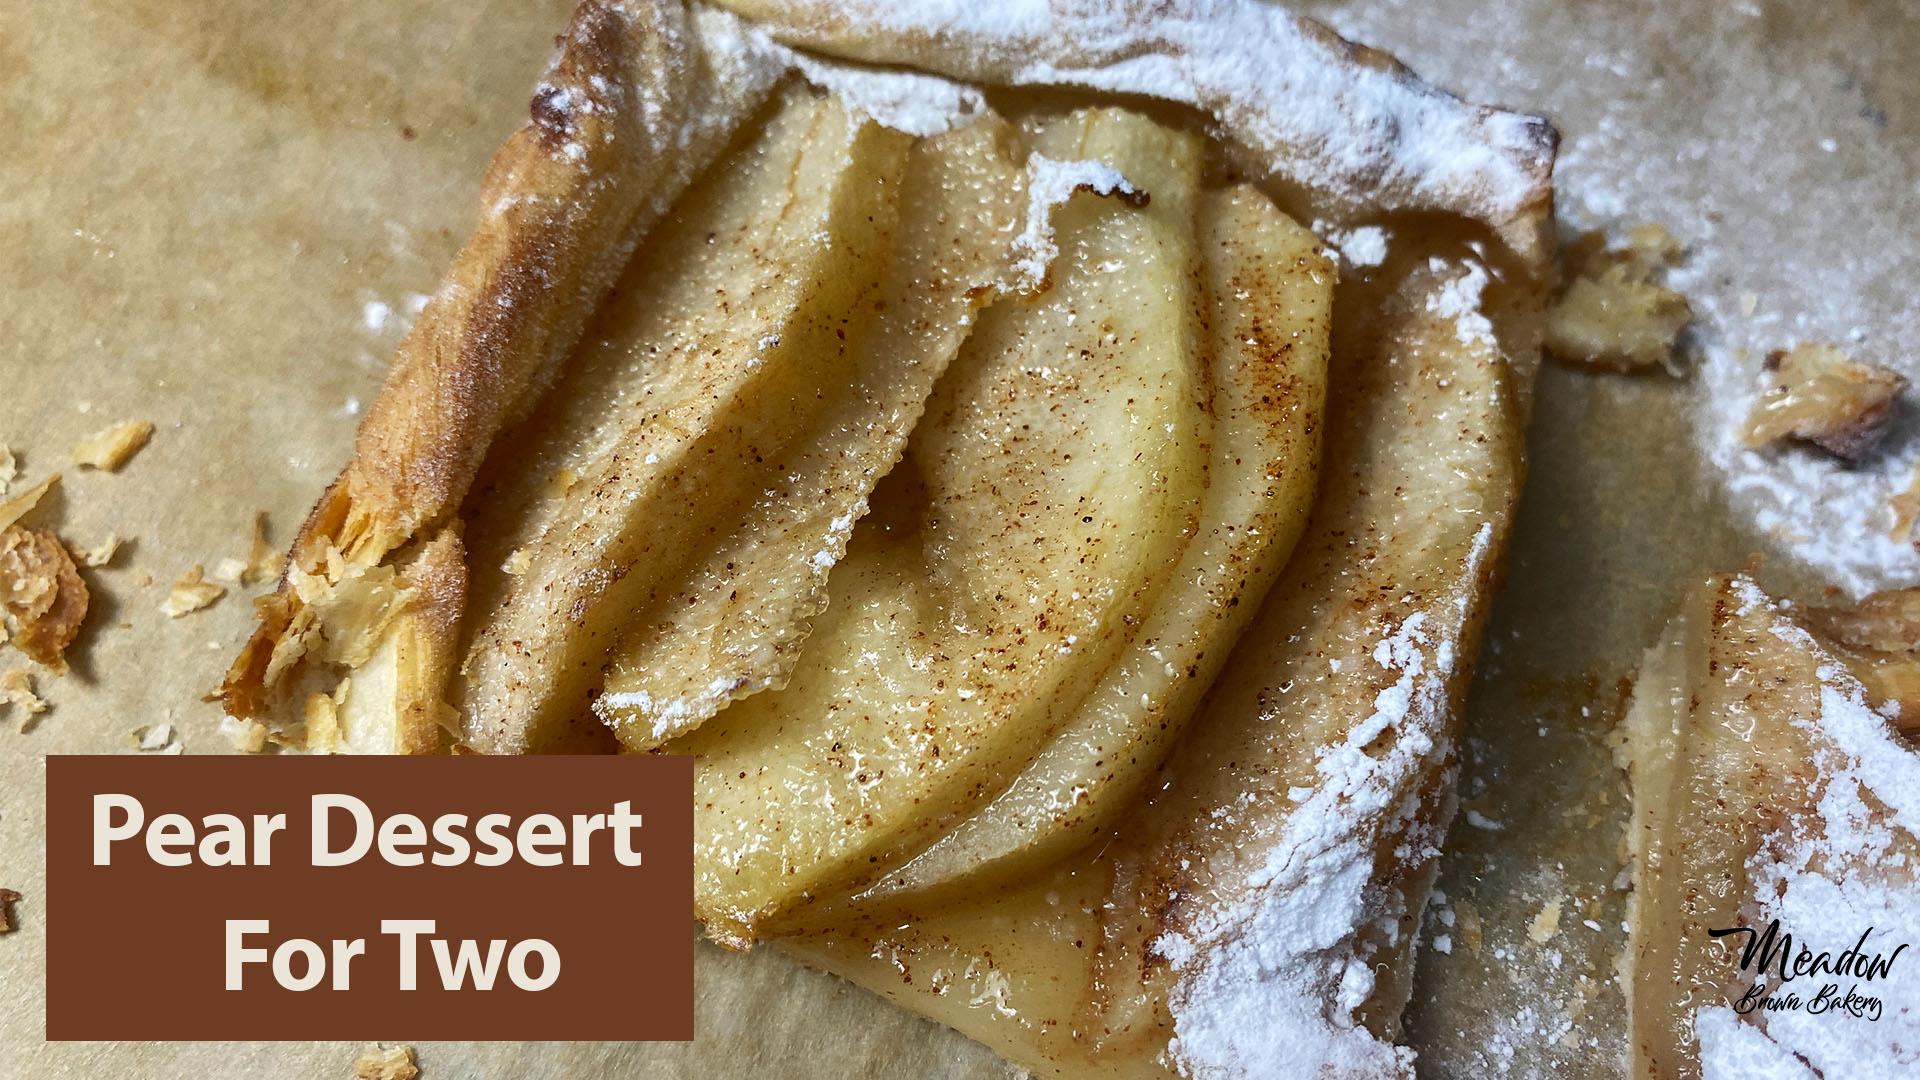 Pear dessert for two : Puff pastry pear tart